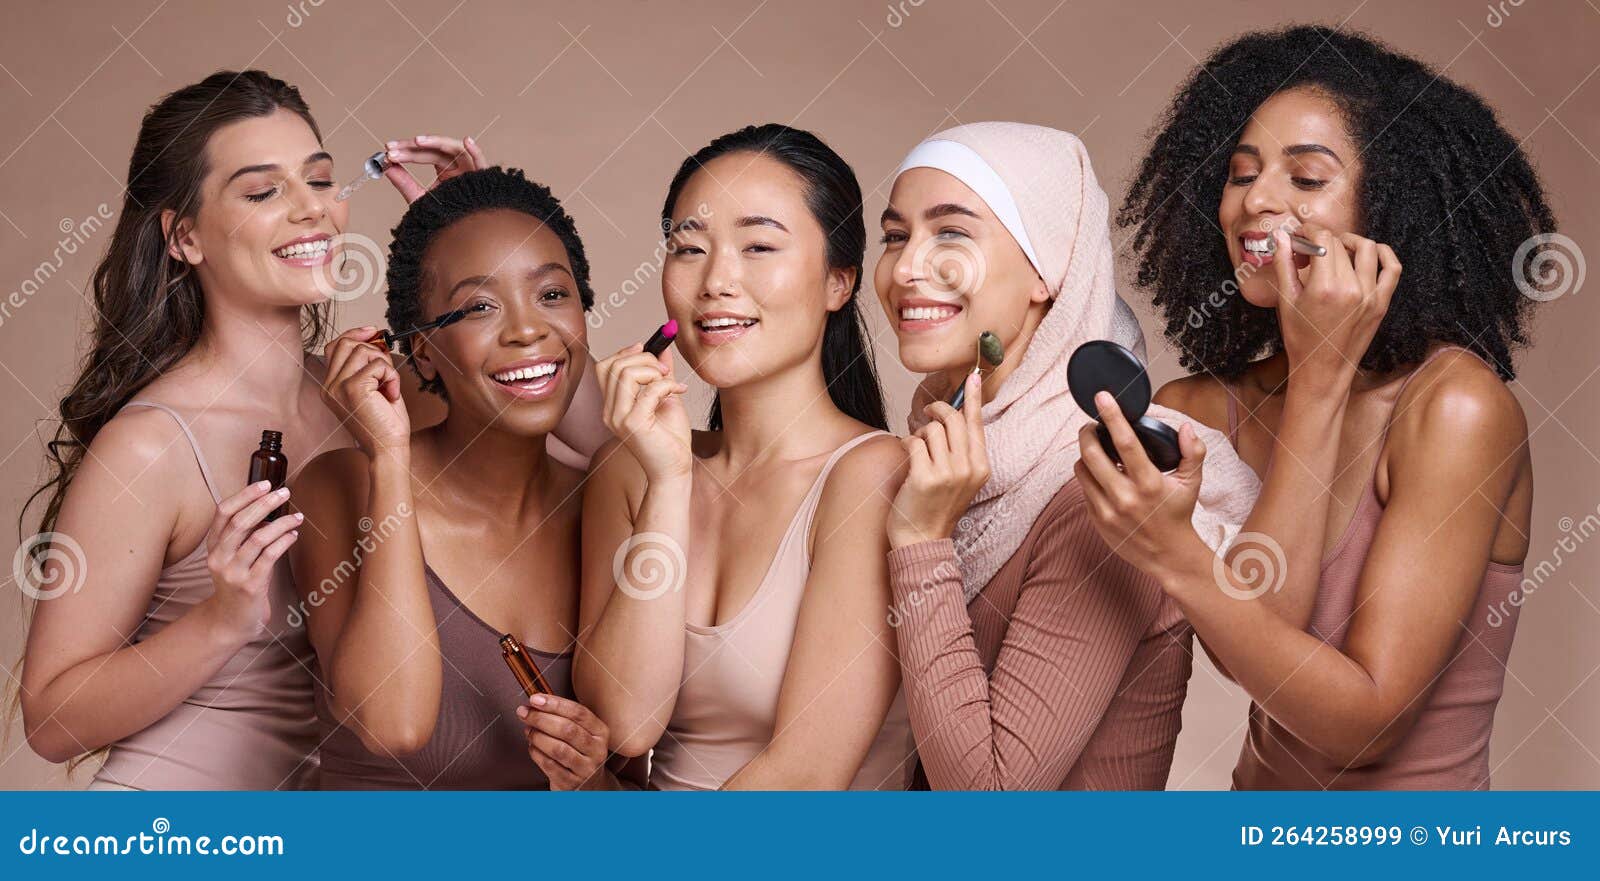 face, skincare makeup and group of women in studio on a brown background. beauty portrait, diversity and female models